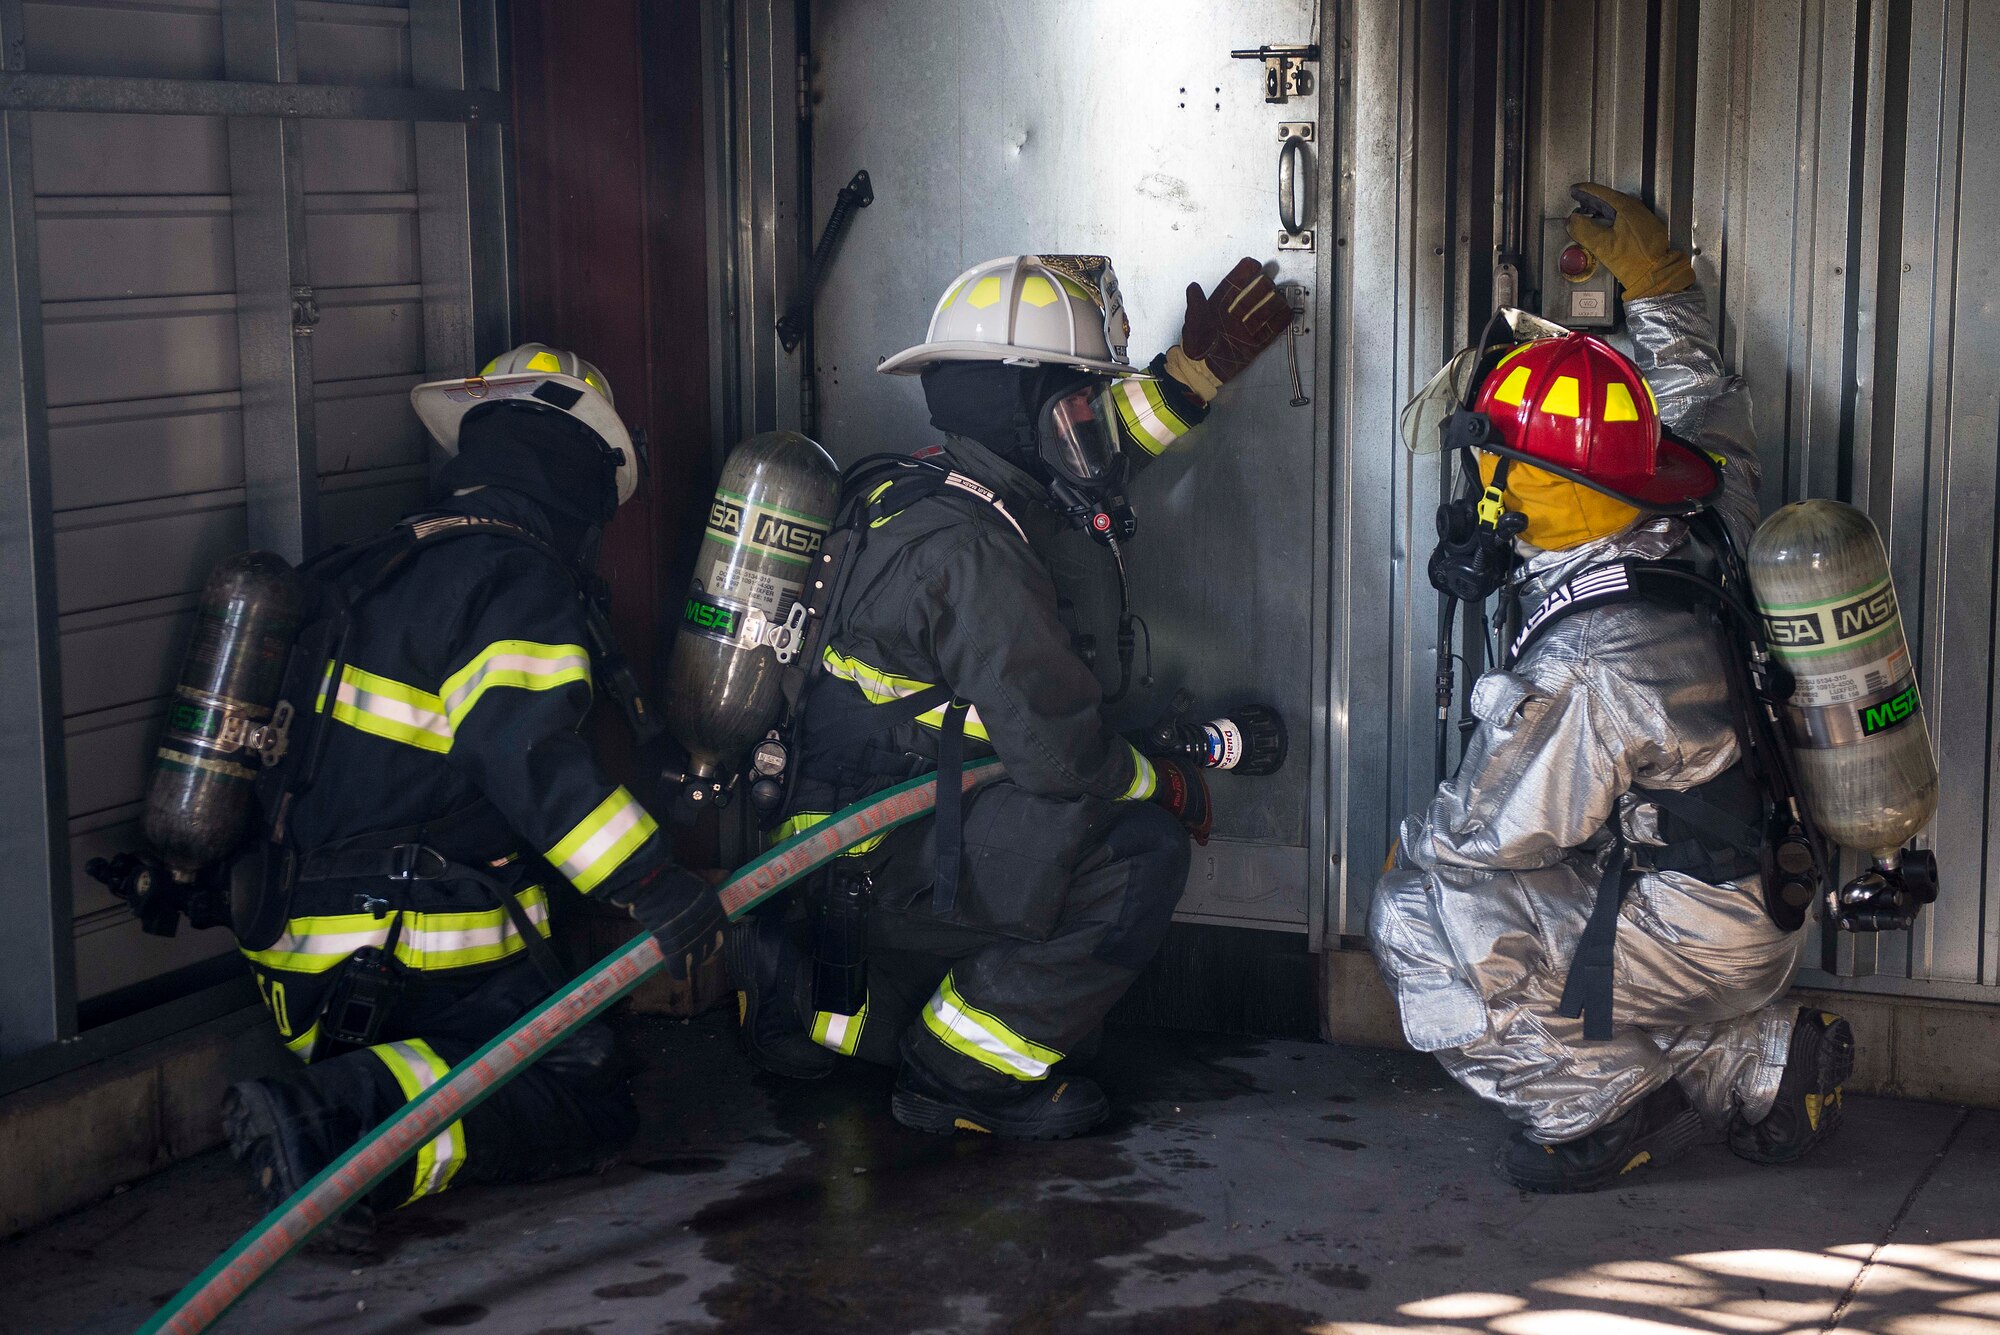 A firefighter with the 19th Civil Engineer Squadron (center) prepares to enter a room while participating in a training course at Scott Air Force Base, Ill., Aug. 31, 2016. The training was part of a three-day live fire, fixed facility credentialing course developed by the International Society of Fire Service Instructors. The program explored the most recent National Fire Protection Association standards and applied principles of the standards to the student’s ability to instruct live fire training in a safe environment. The 19th CES is located at Little Rock AFB, Arkansas. (U.S. Air Force photo/Tech. Sgt. Jonathan Fowler)